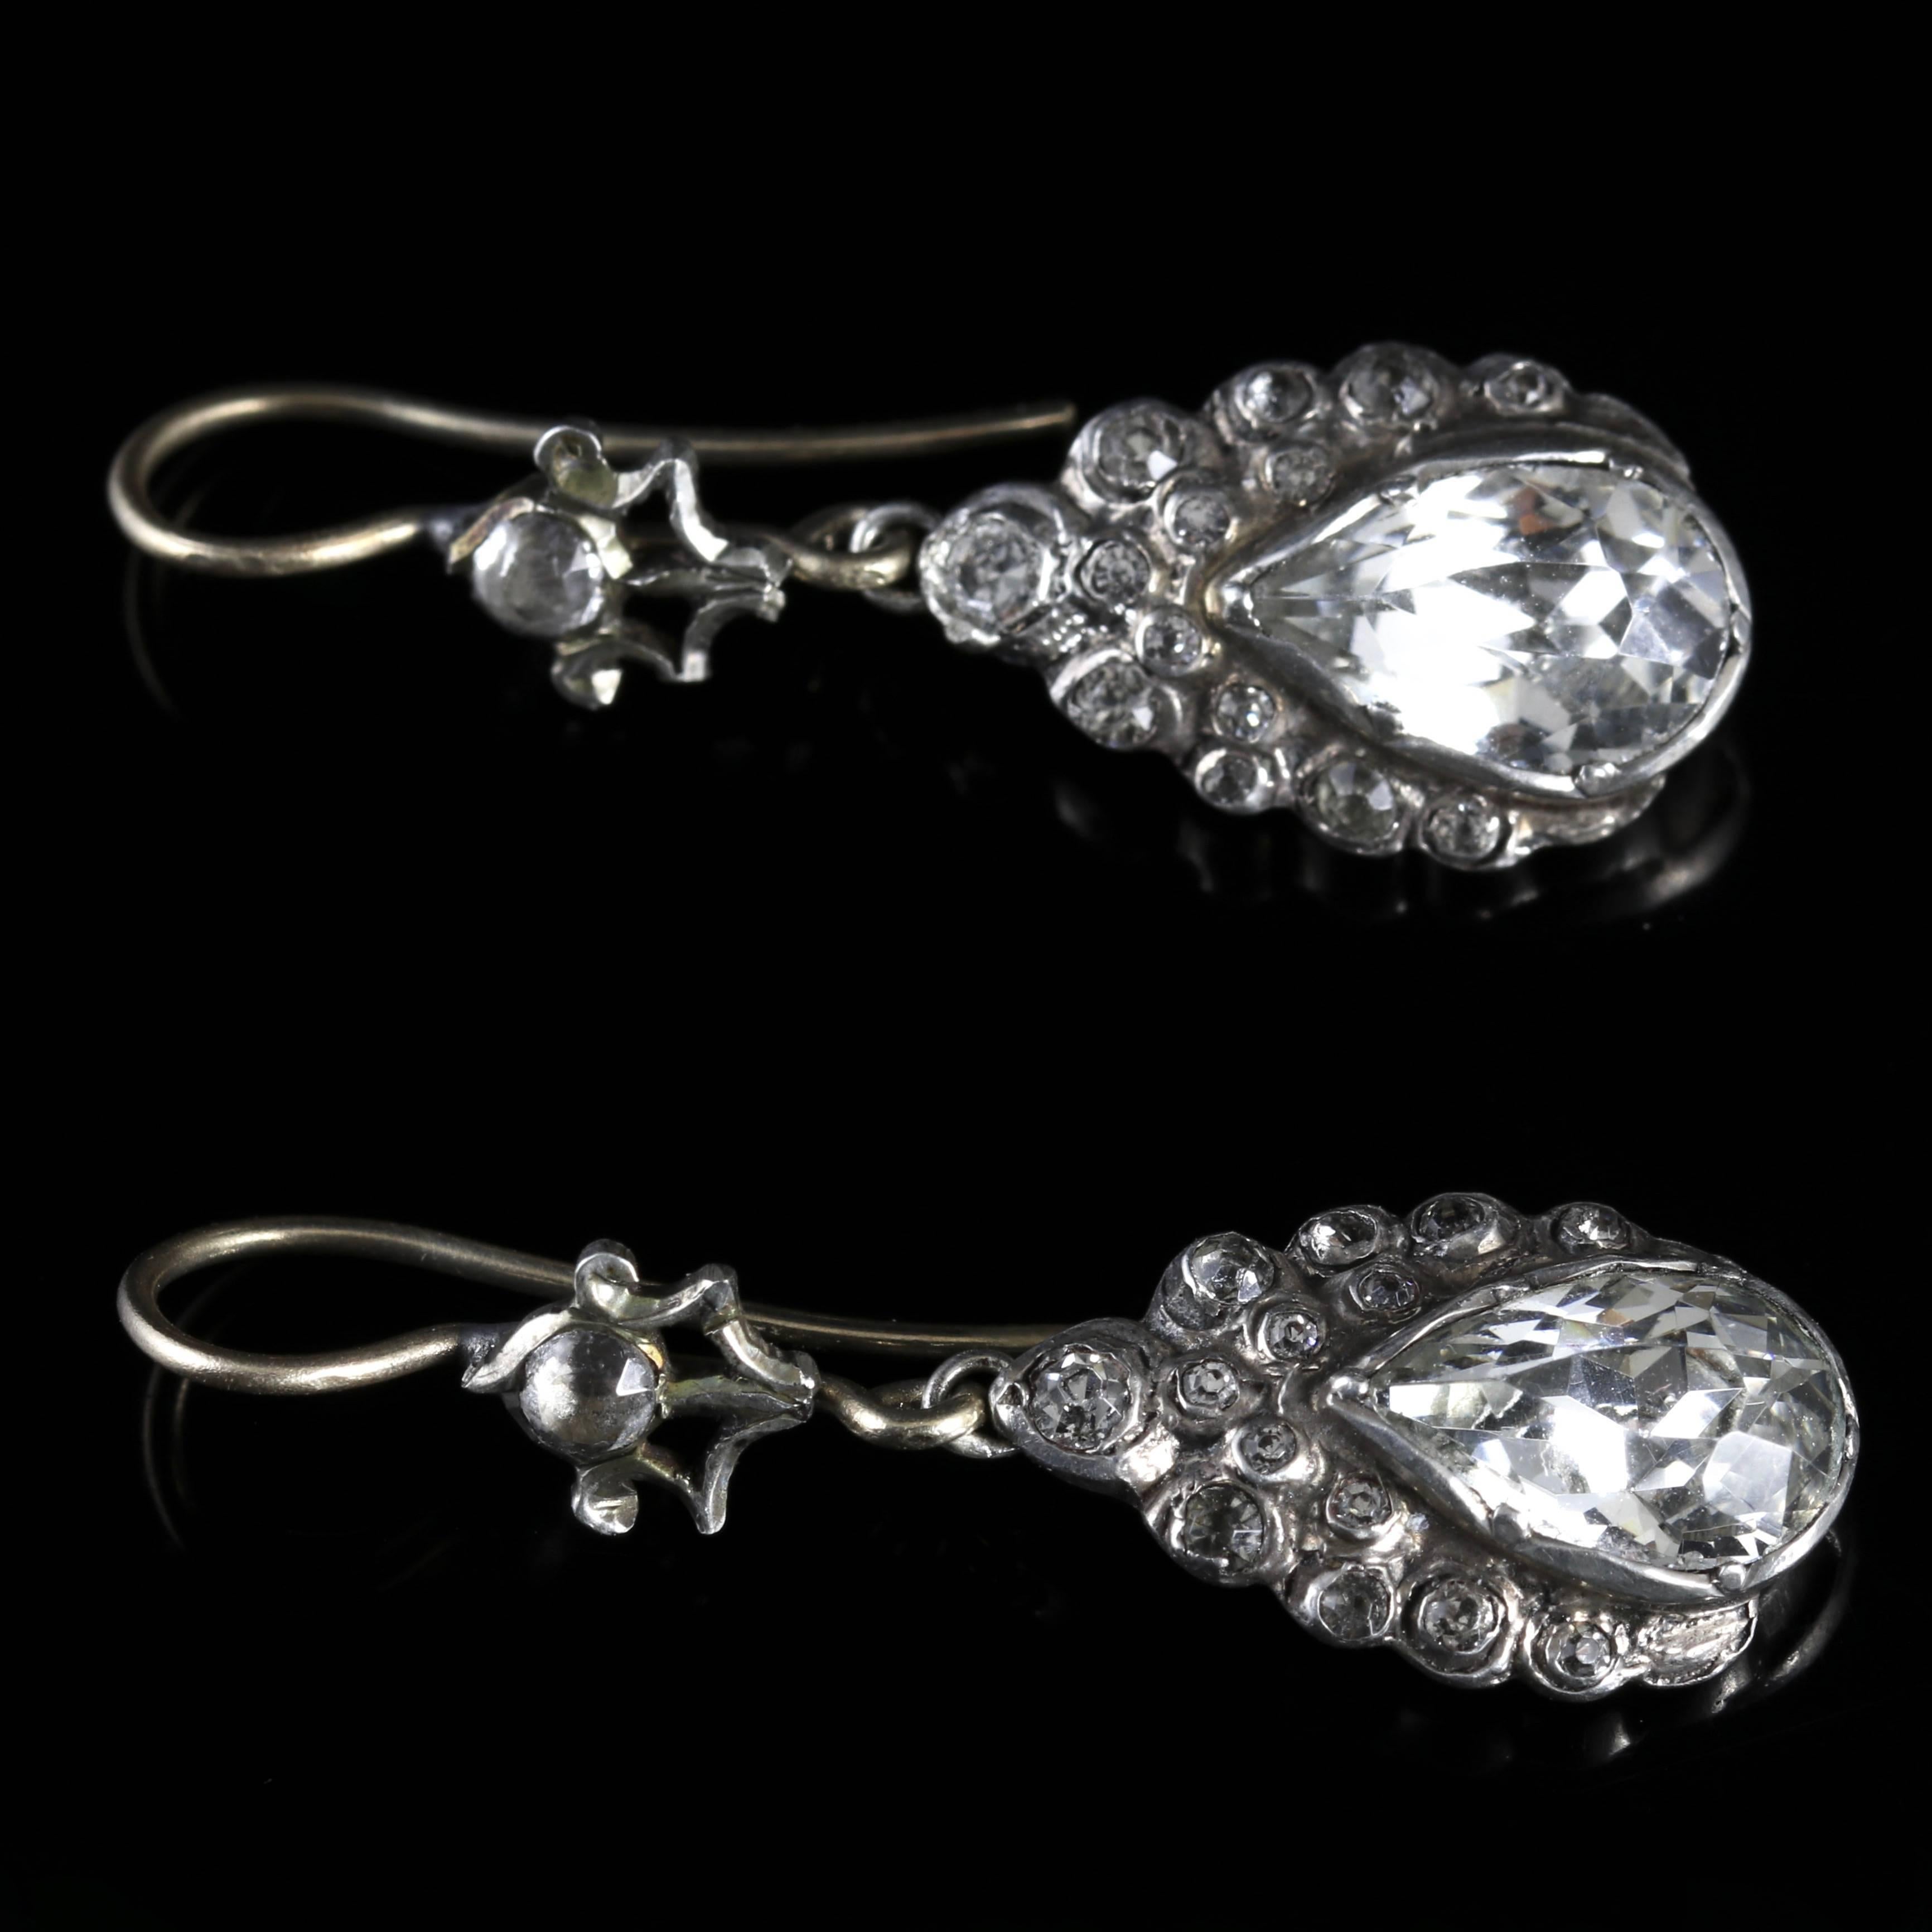 These fabulous Silver antique earrings are genuine Victorian, Circa 1900.

The earrings are set with beautiful pear shaped Paste Stones in a detailed Victorian gallery.

Each pear shaped Paste Stone is 1.65ct each.

The smaller Paste Stones adorn